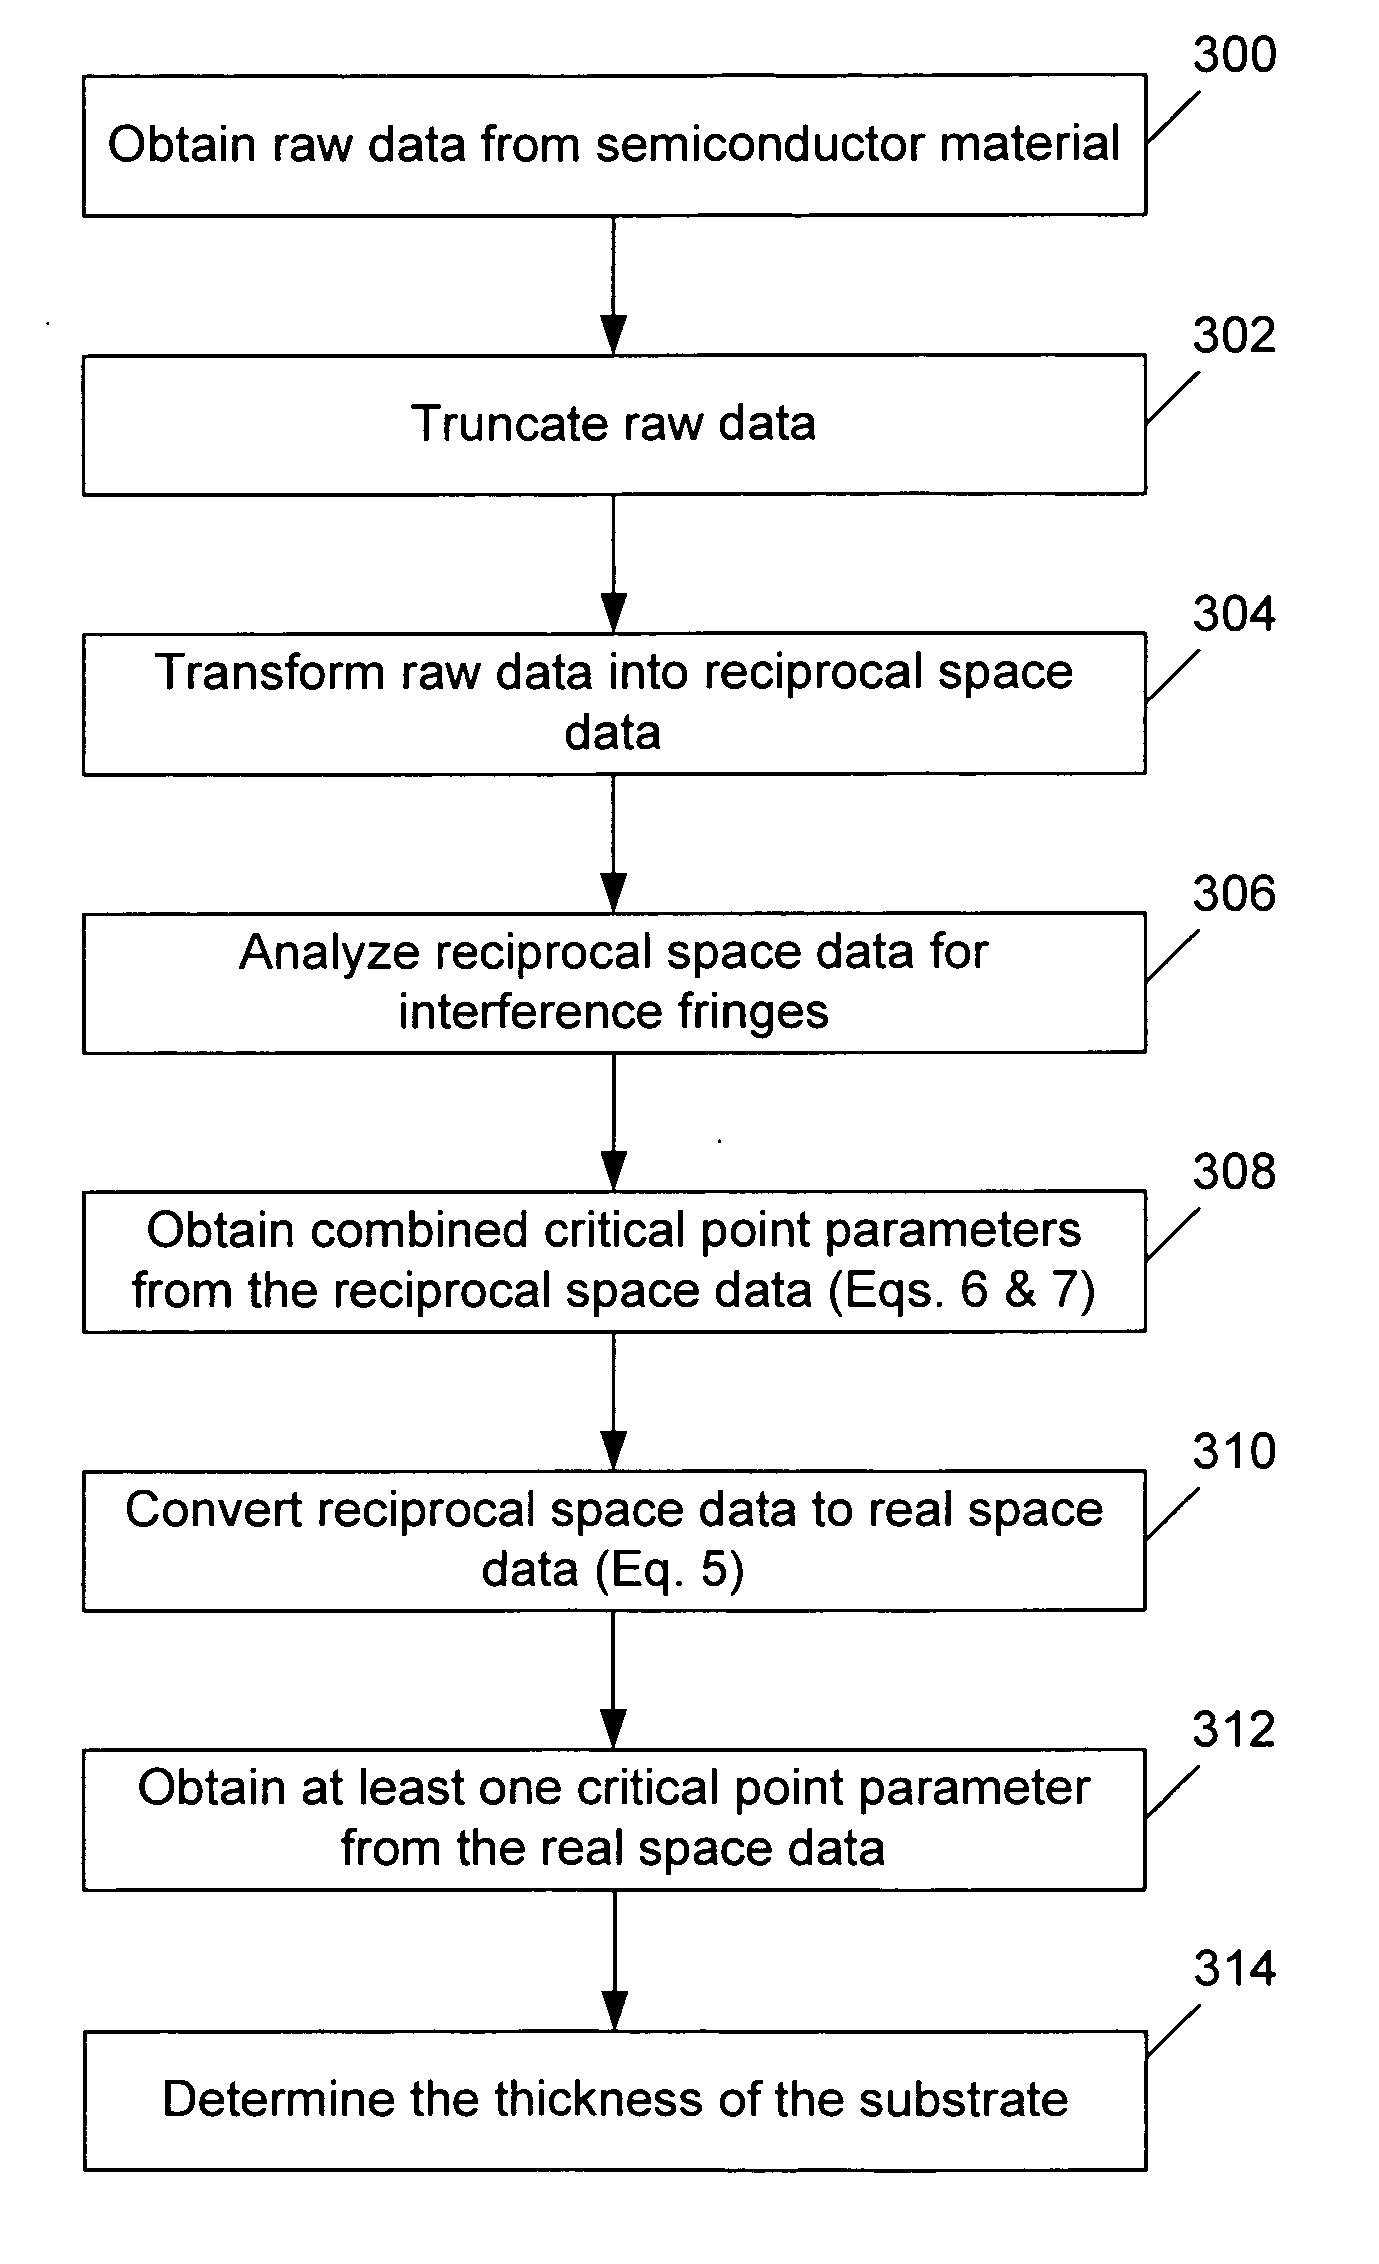 Methods and systems for characterizing semiconductor materials